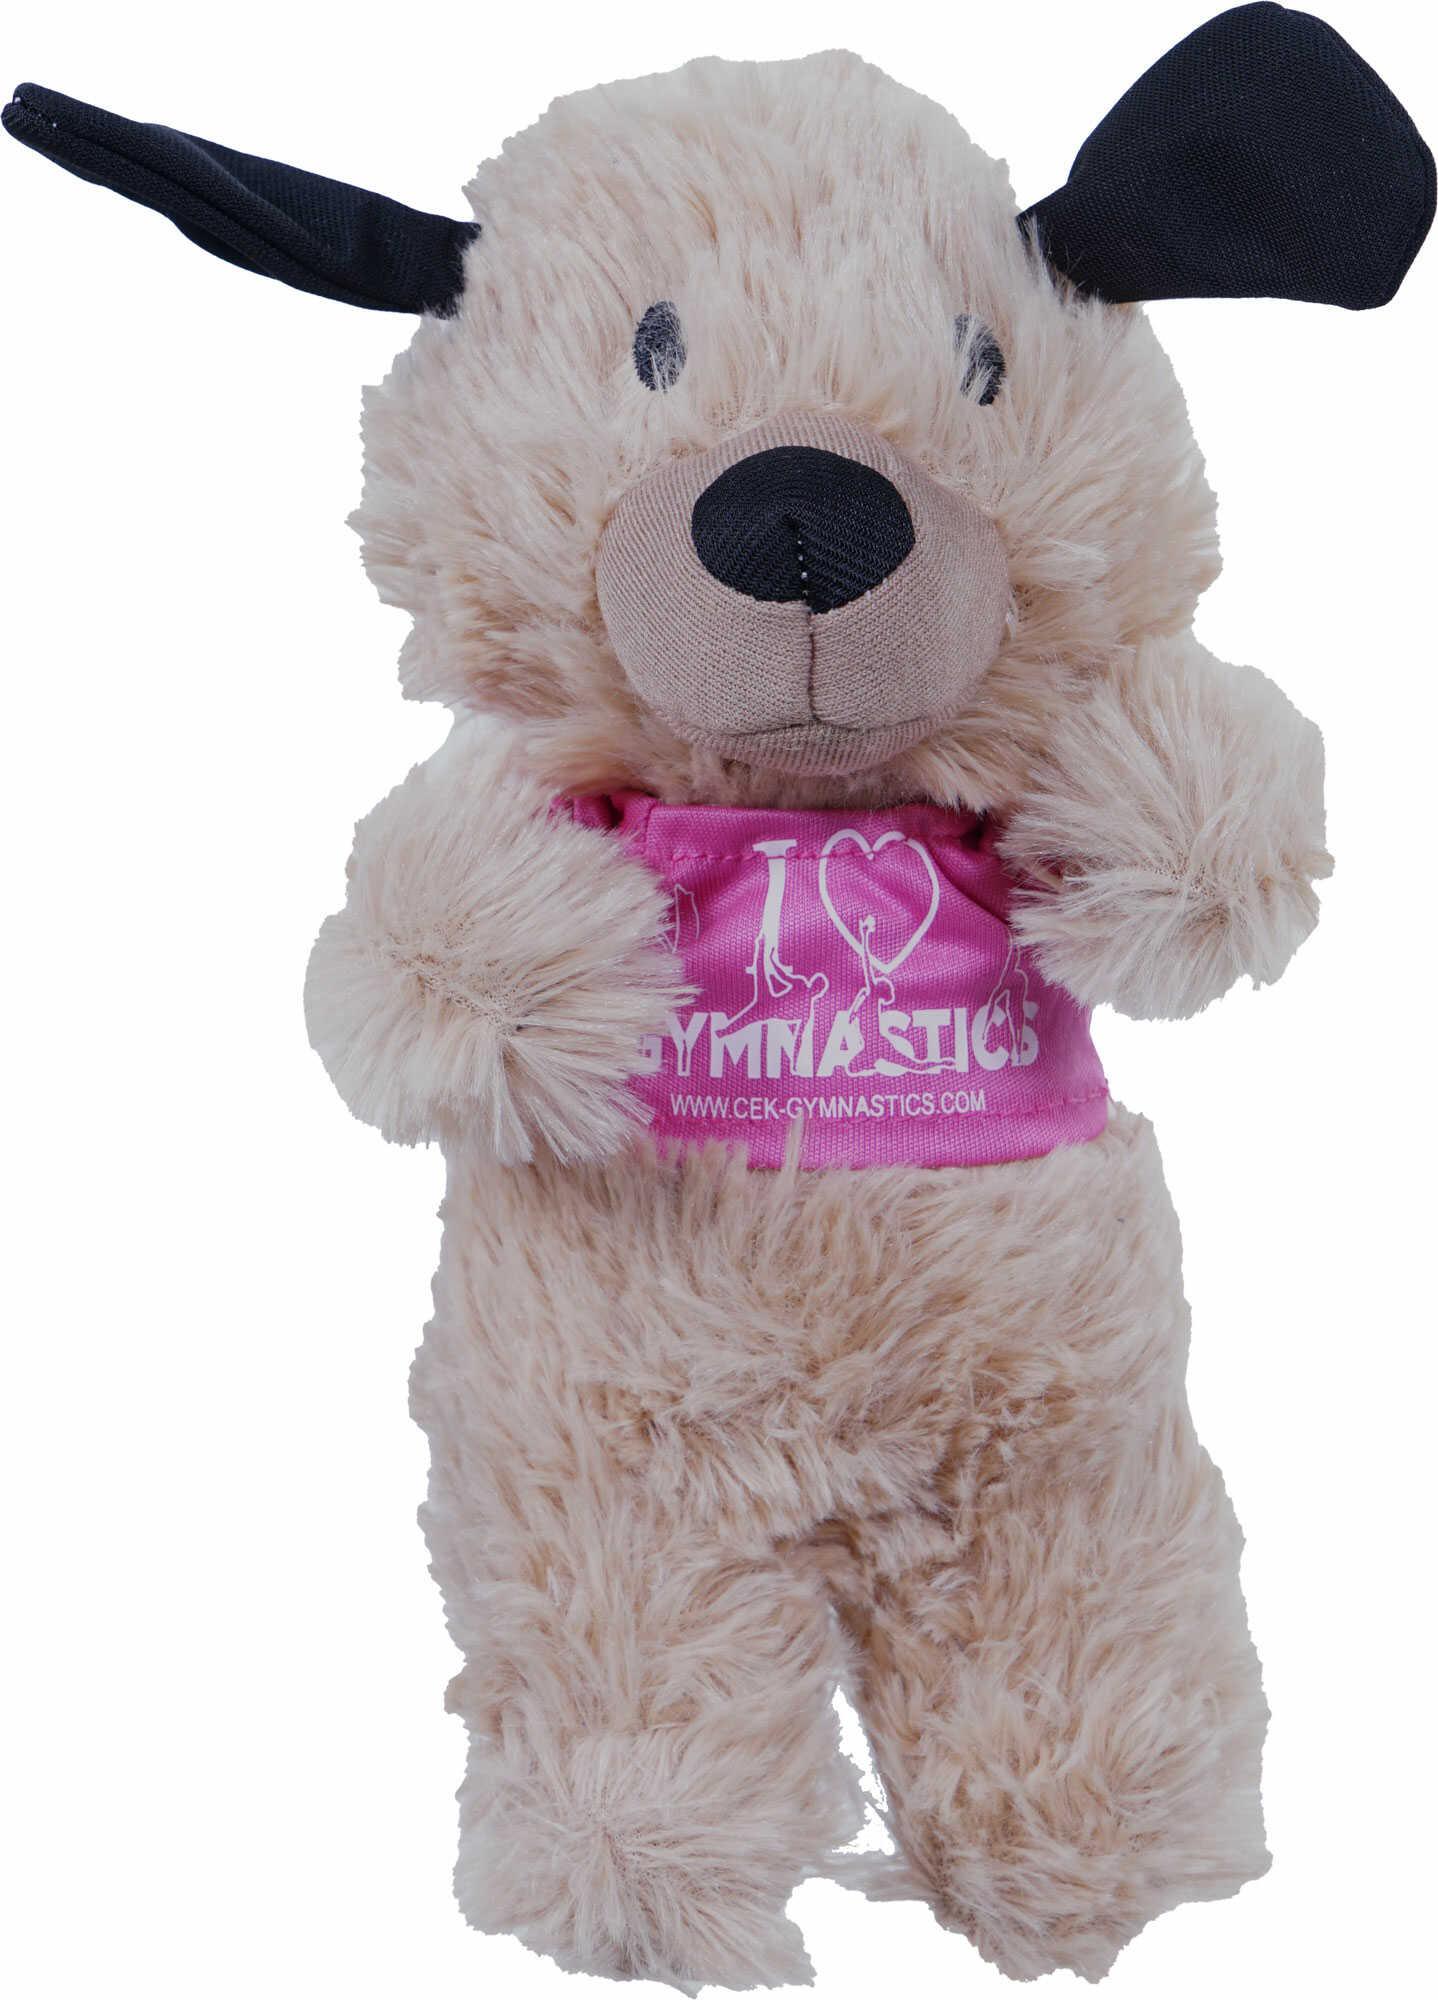 Fluffy dog cuddly toy with promo t-shirt